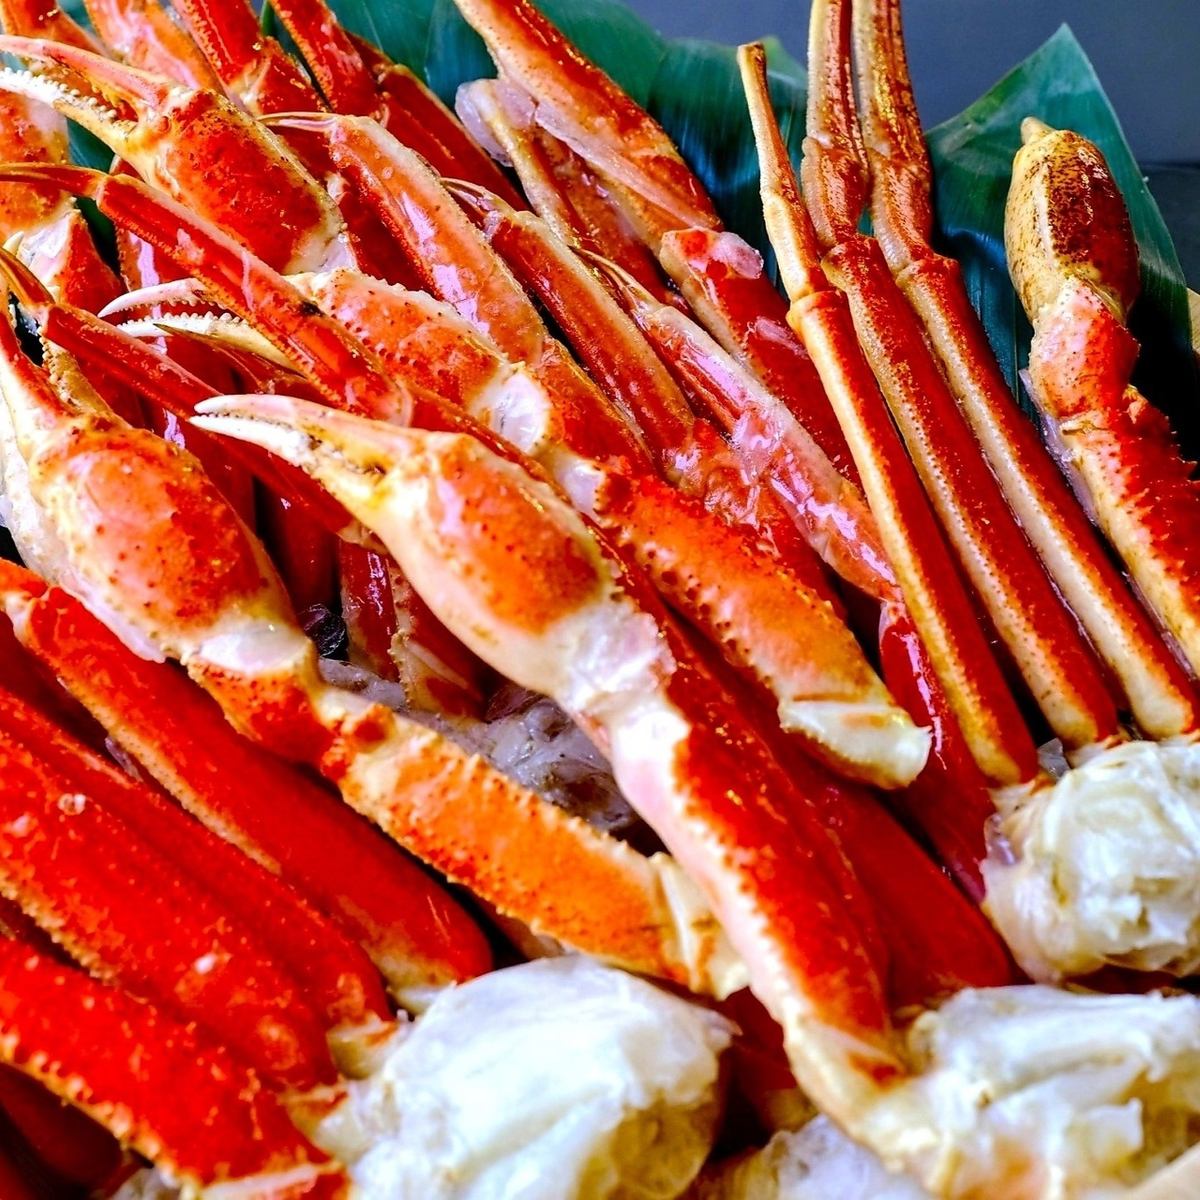 All-you-can-eat snow crab full of flavor and meaty meat♪